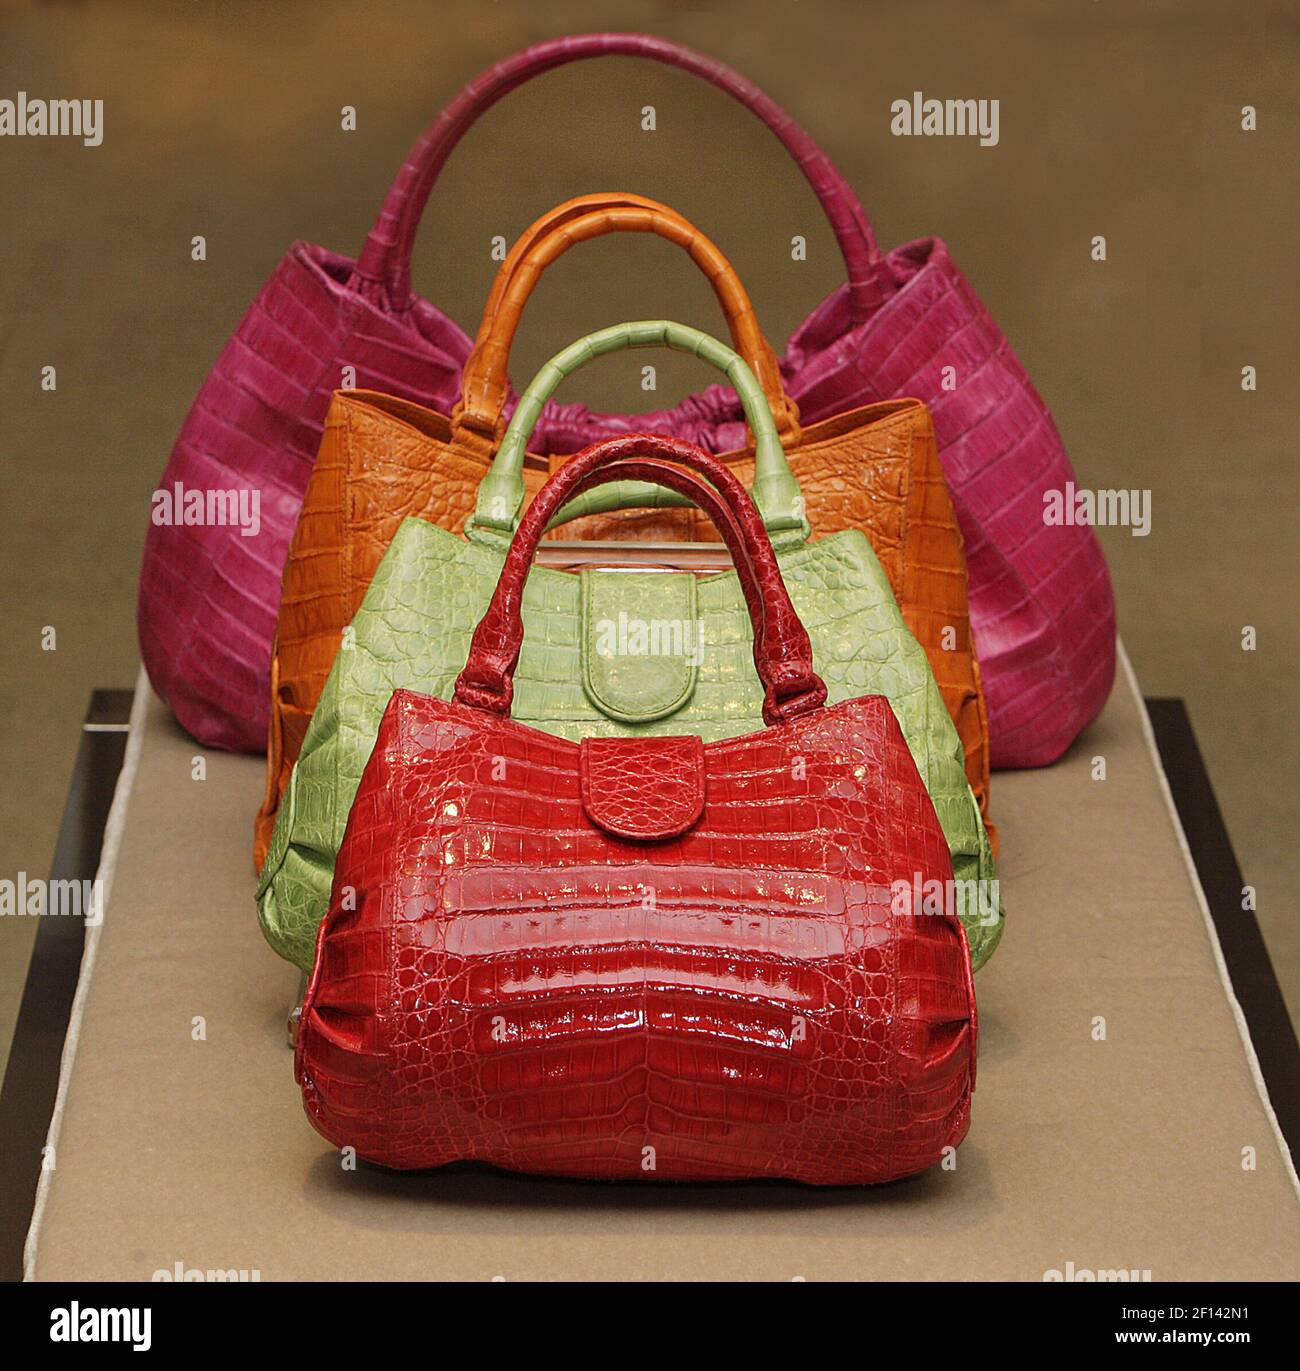 Nancy Gonzalez, from Colombia, shows off her latest collection of designer  handbags, like these handbags priced from bottom to top: red, $2750, green,  $2750, orange, $3325, pink, $3150, at Neiman Marcus in